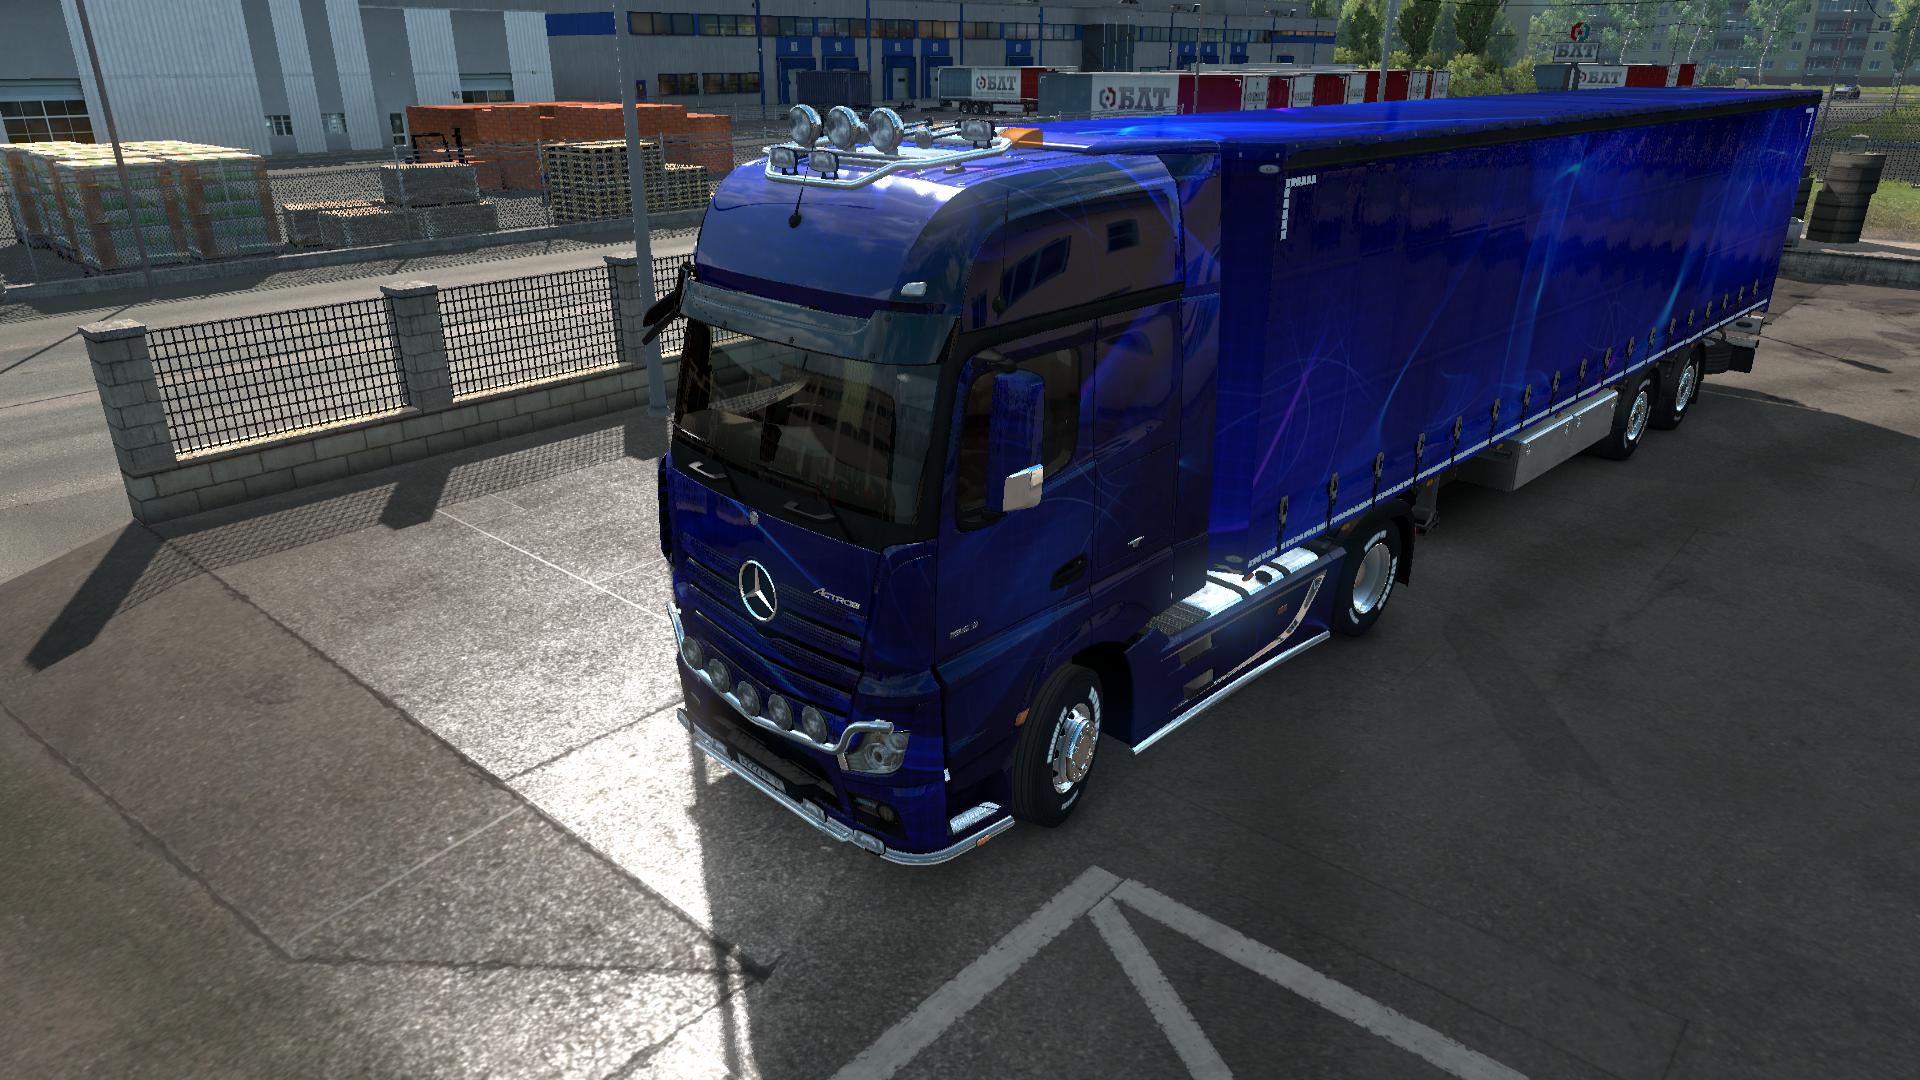 Neon skin on trailers except platforms and Krone 1.34.x